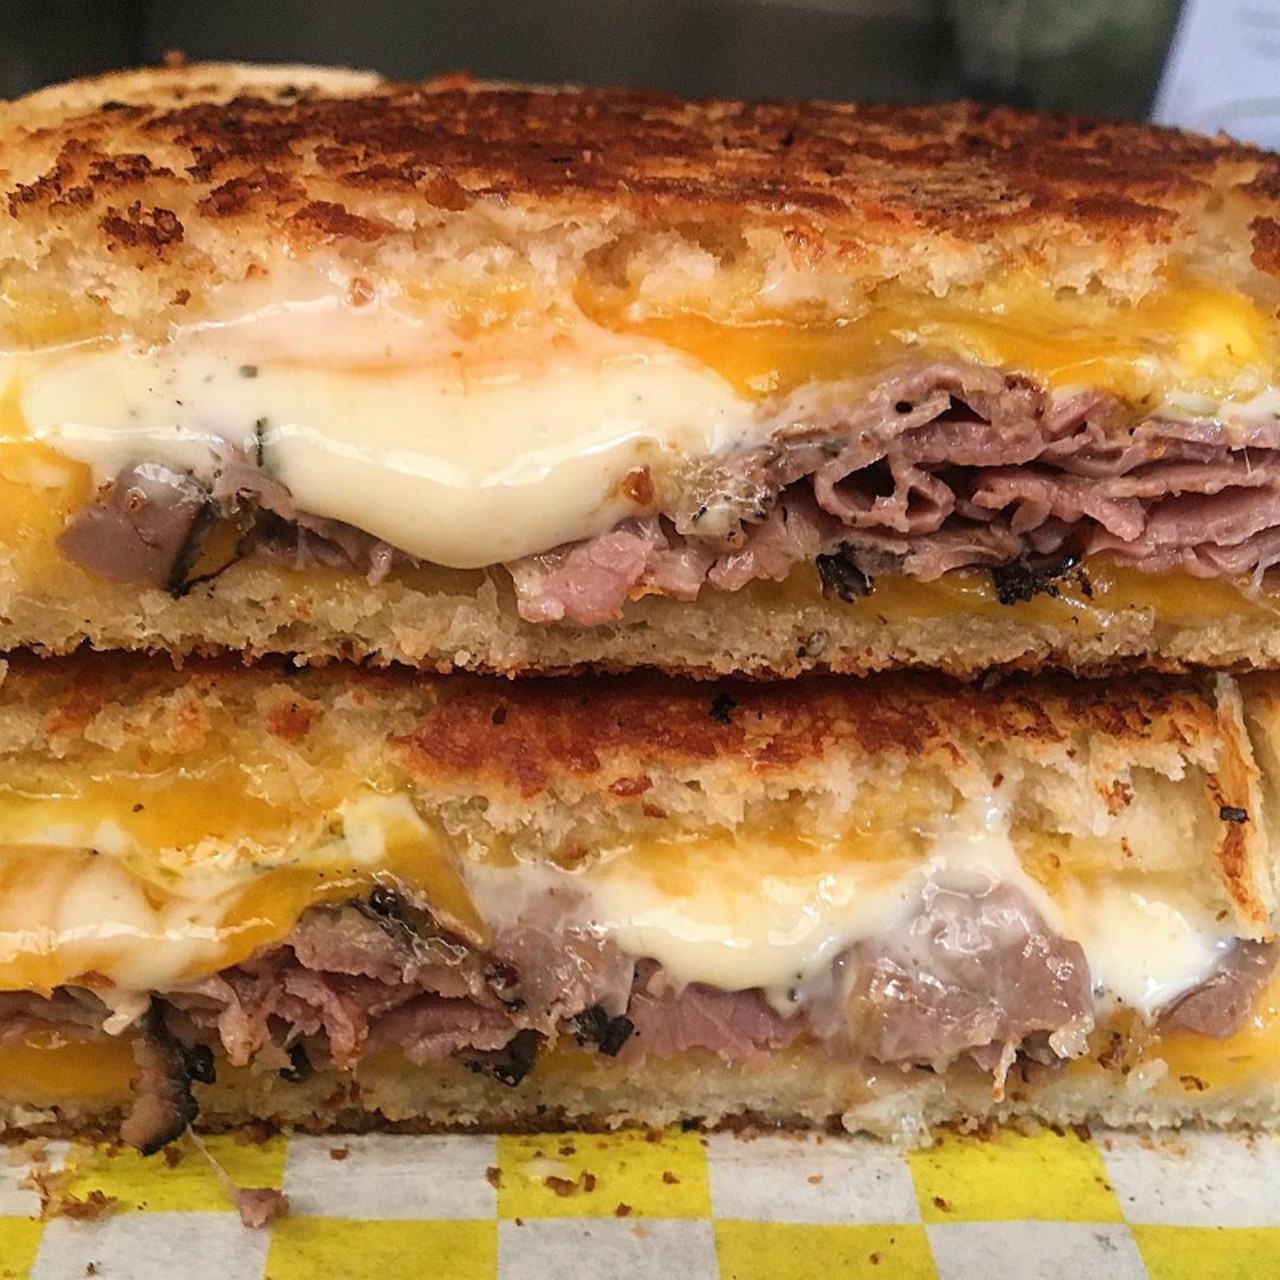 GRILLED CHEESE
The Cheese Shack (food truck)
facebook.com/TheCheeseShack
The Cheese Shack is a food truck that brings a variety of grilled cheese styles that range from simple to fancy and mac and cheese balls to you, which means that it's basically heaven on wheels.
Photo courtesy of cheese_shack_stl / Instagram